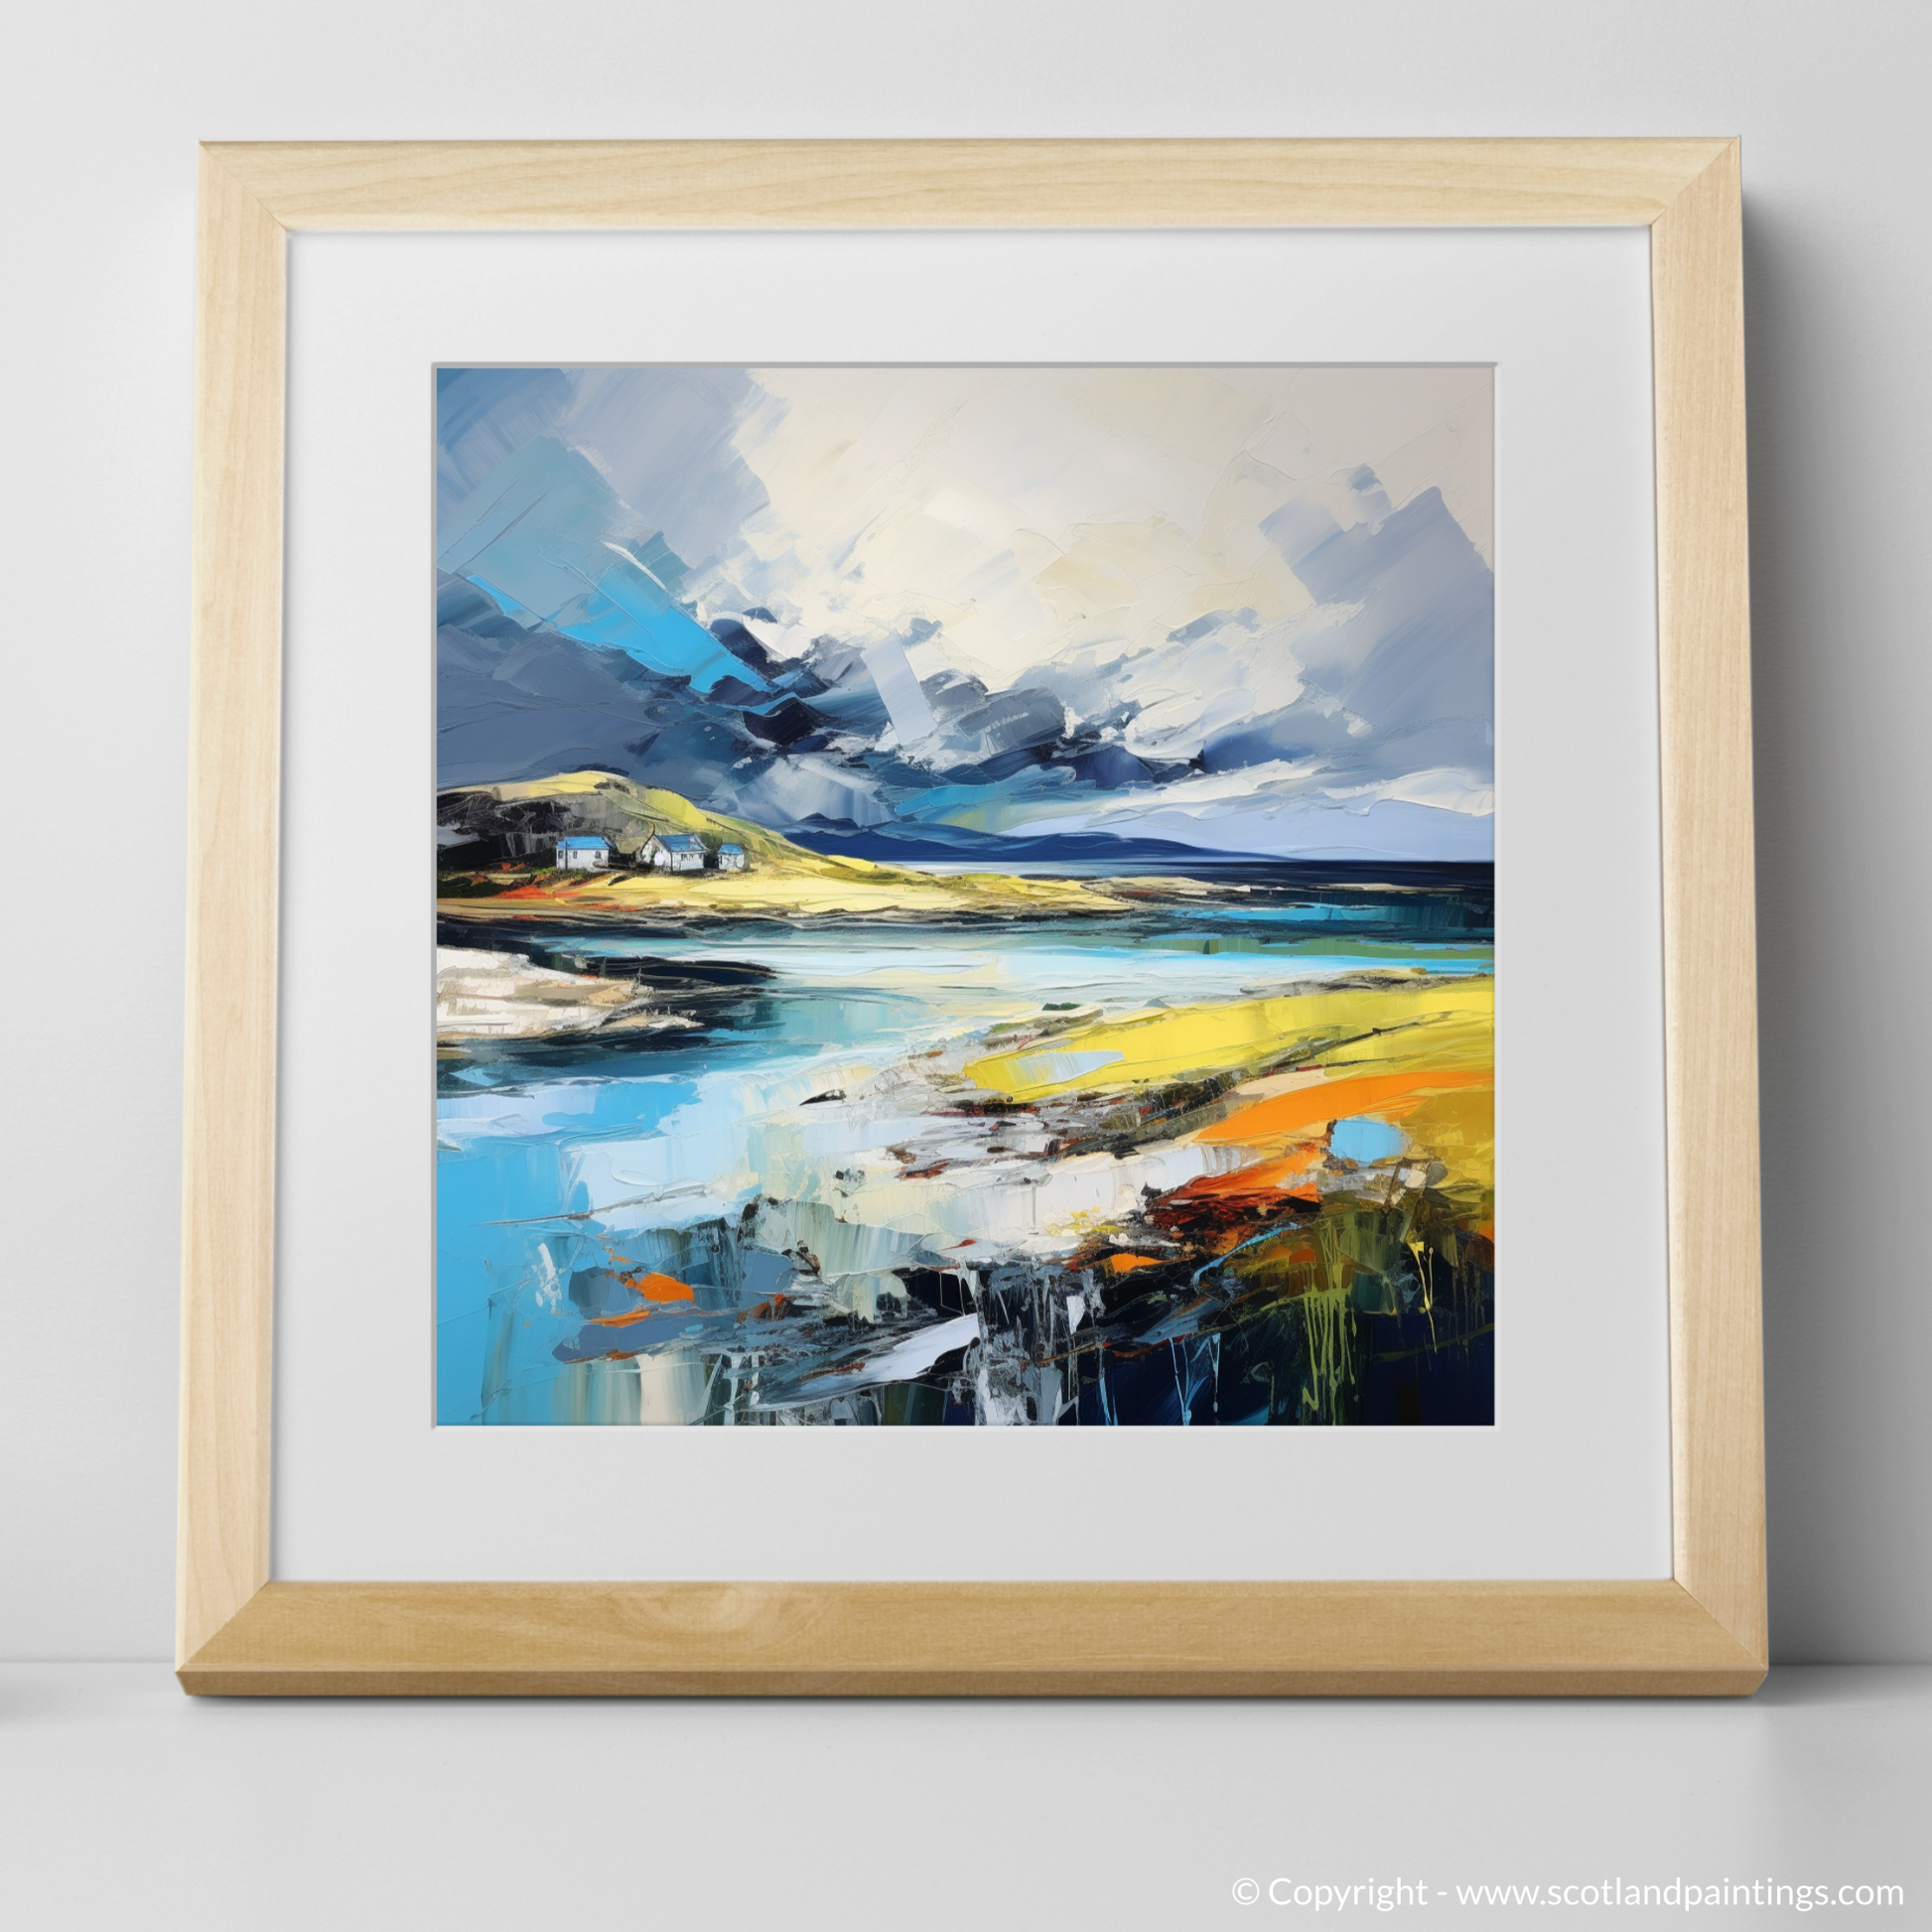 Art Print of Achmelvich Bay with a stormy sky with a natural frame